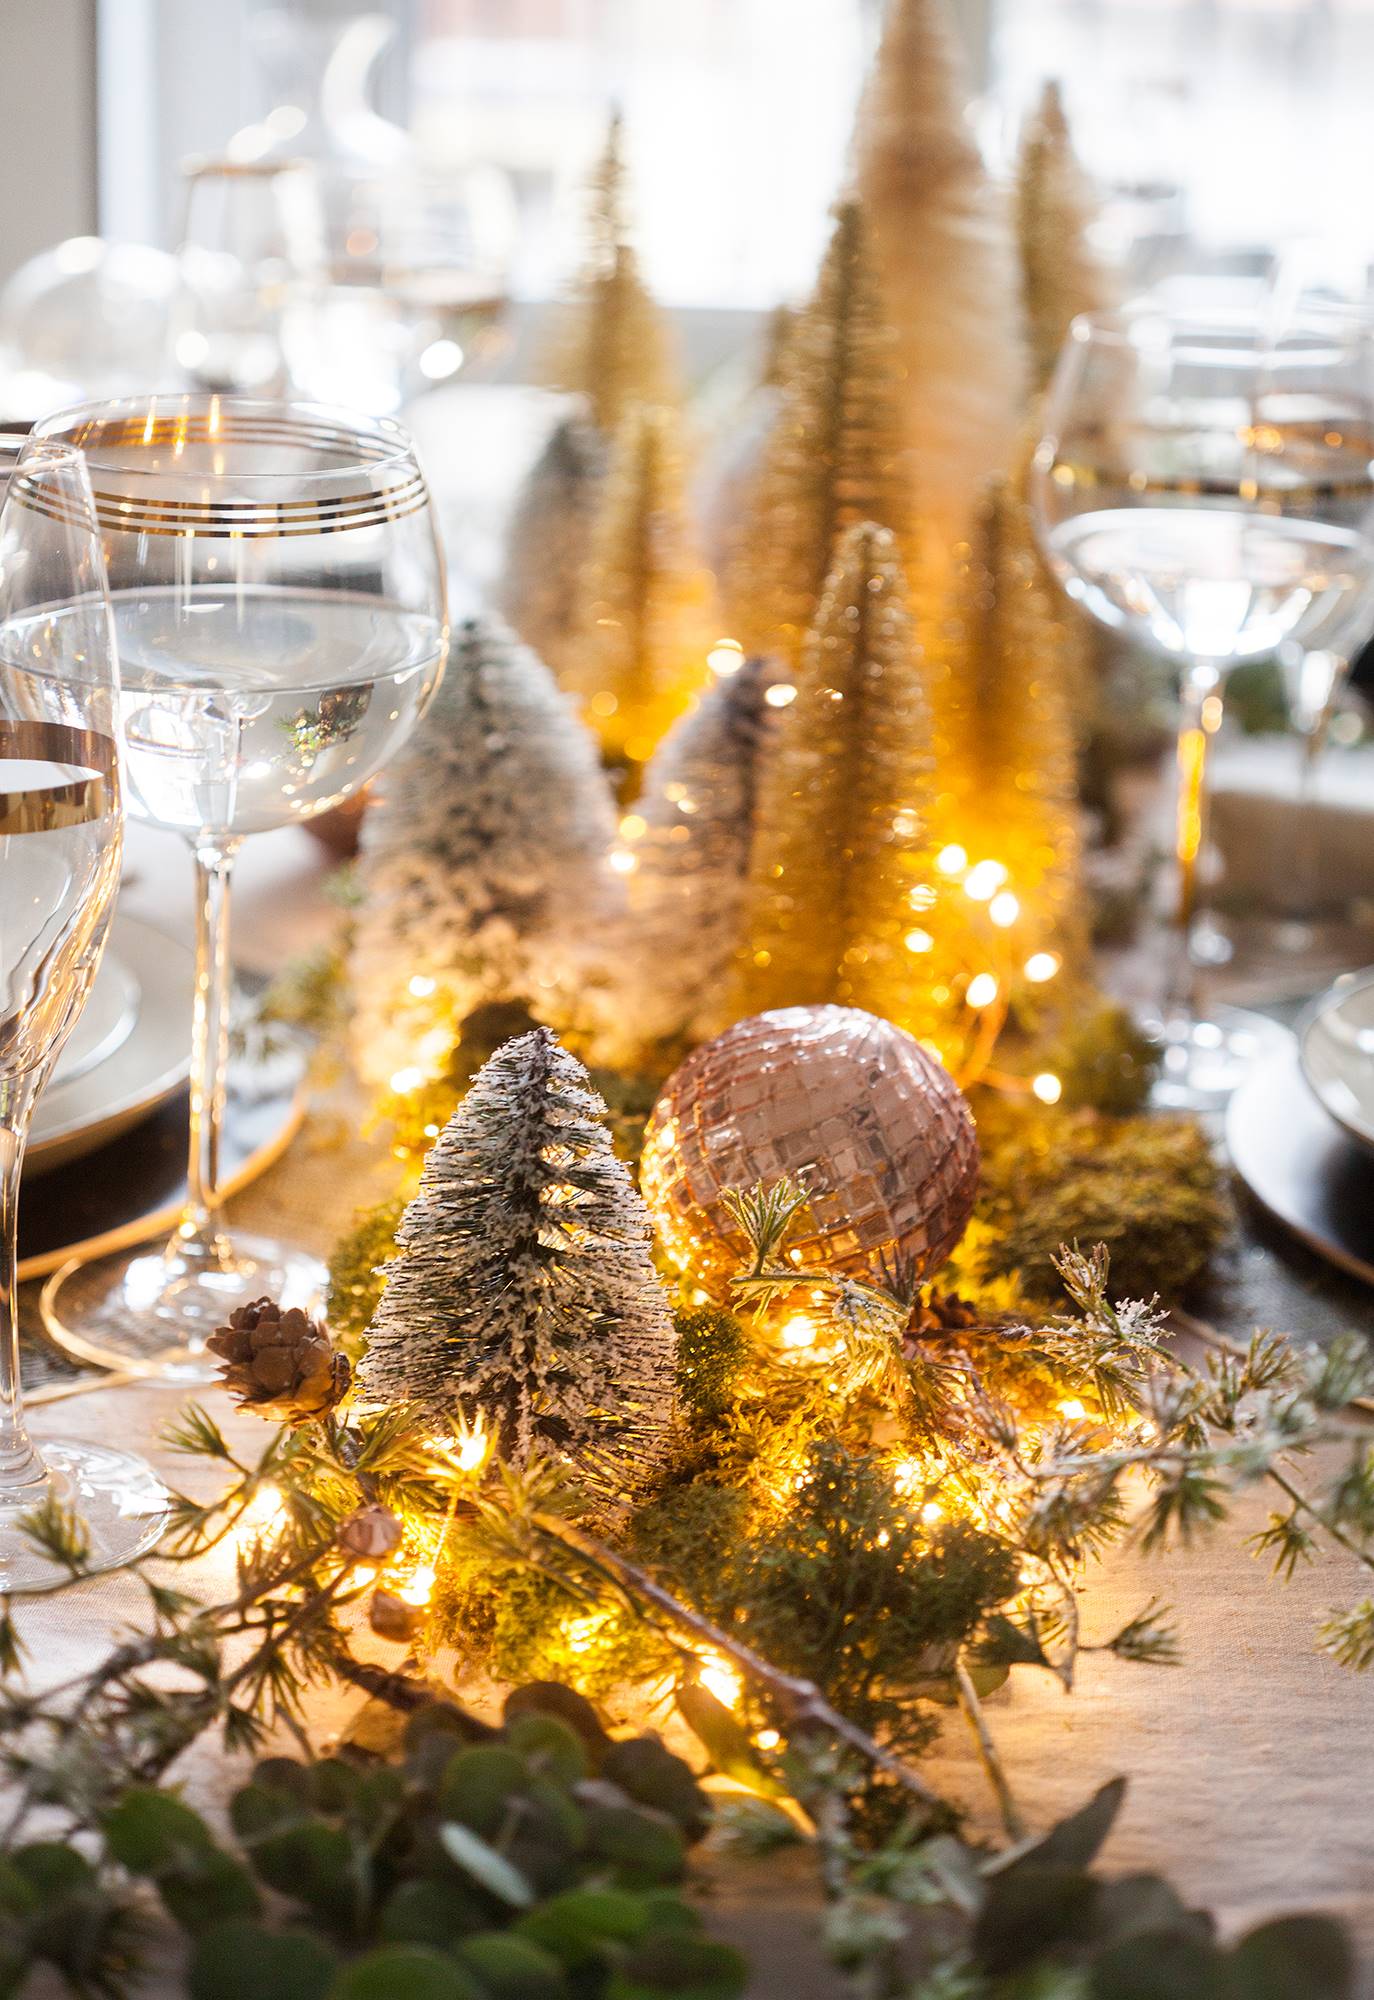 A MINI FOREST FOR CHRISTMAS CENTERPIECES